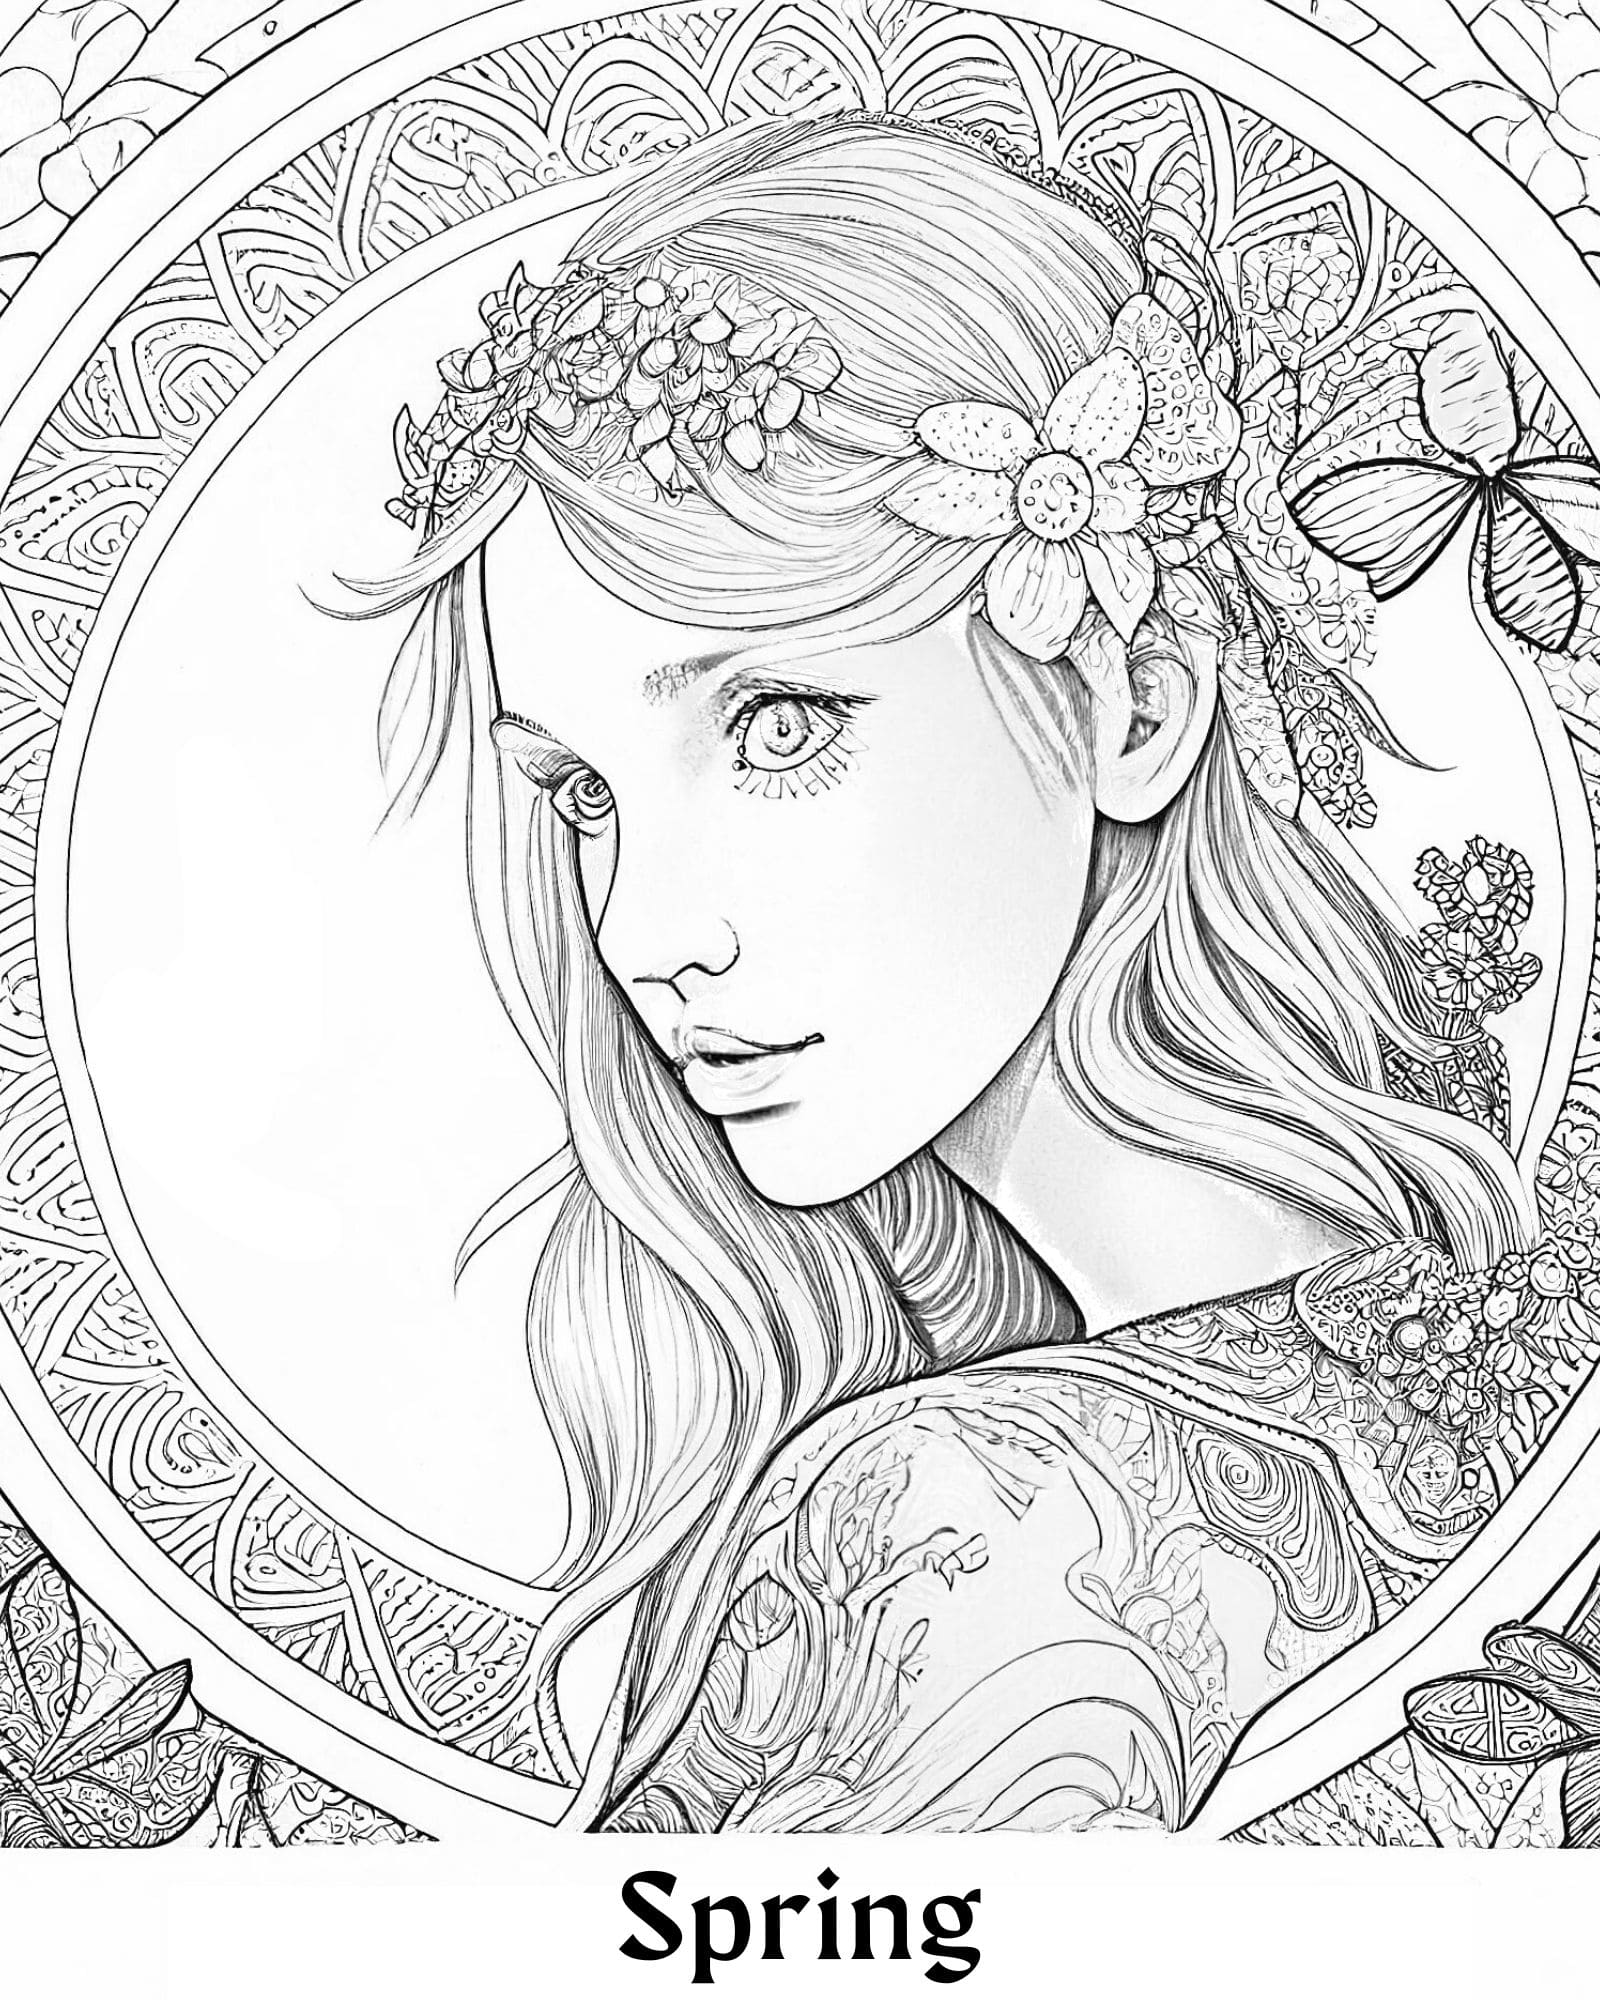 Fascinating fairy coloring pages for adults